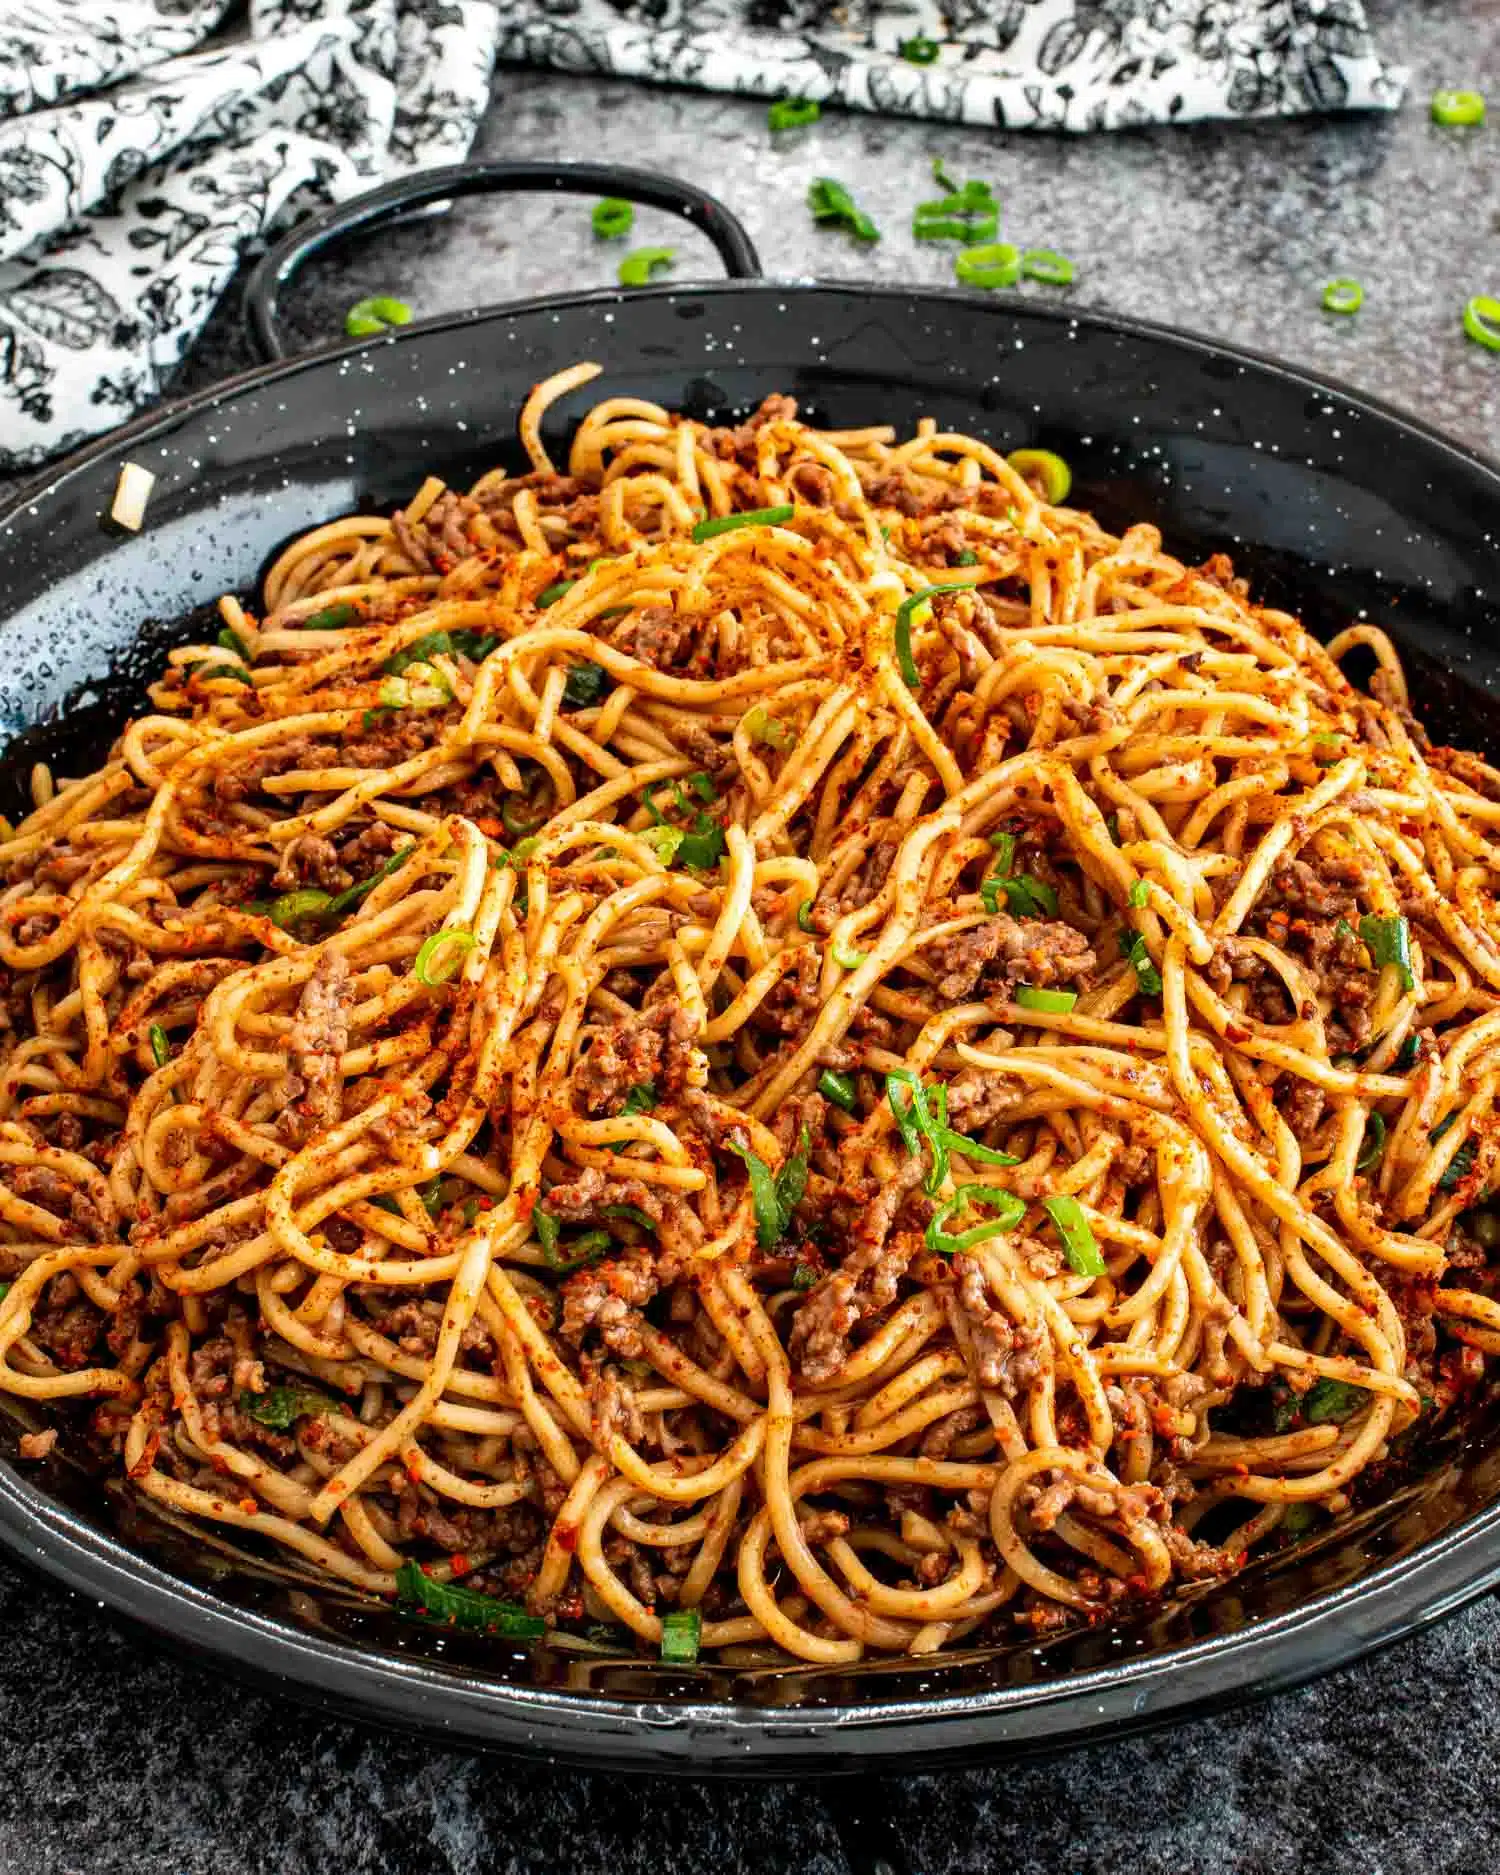 Asian Ground Beef Noodles - Craving Home Cooked